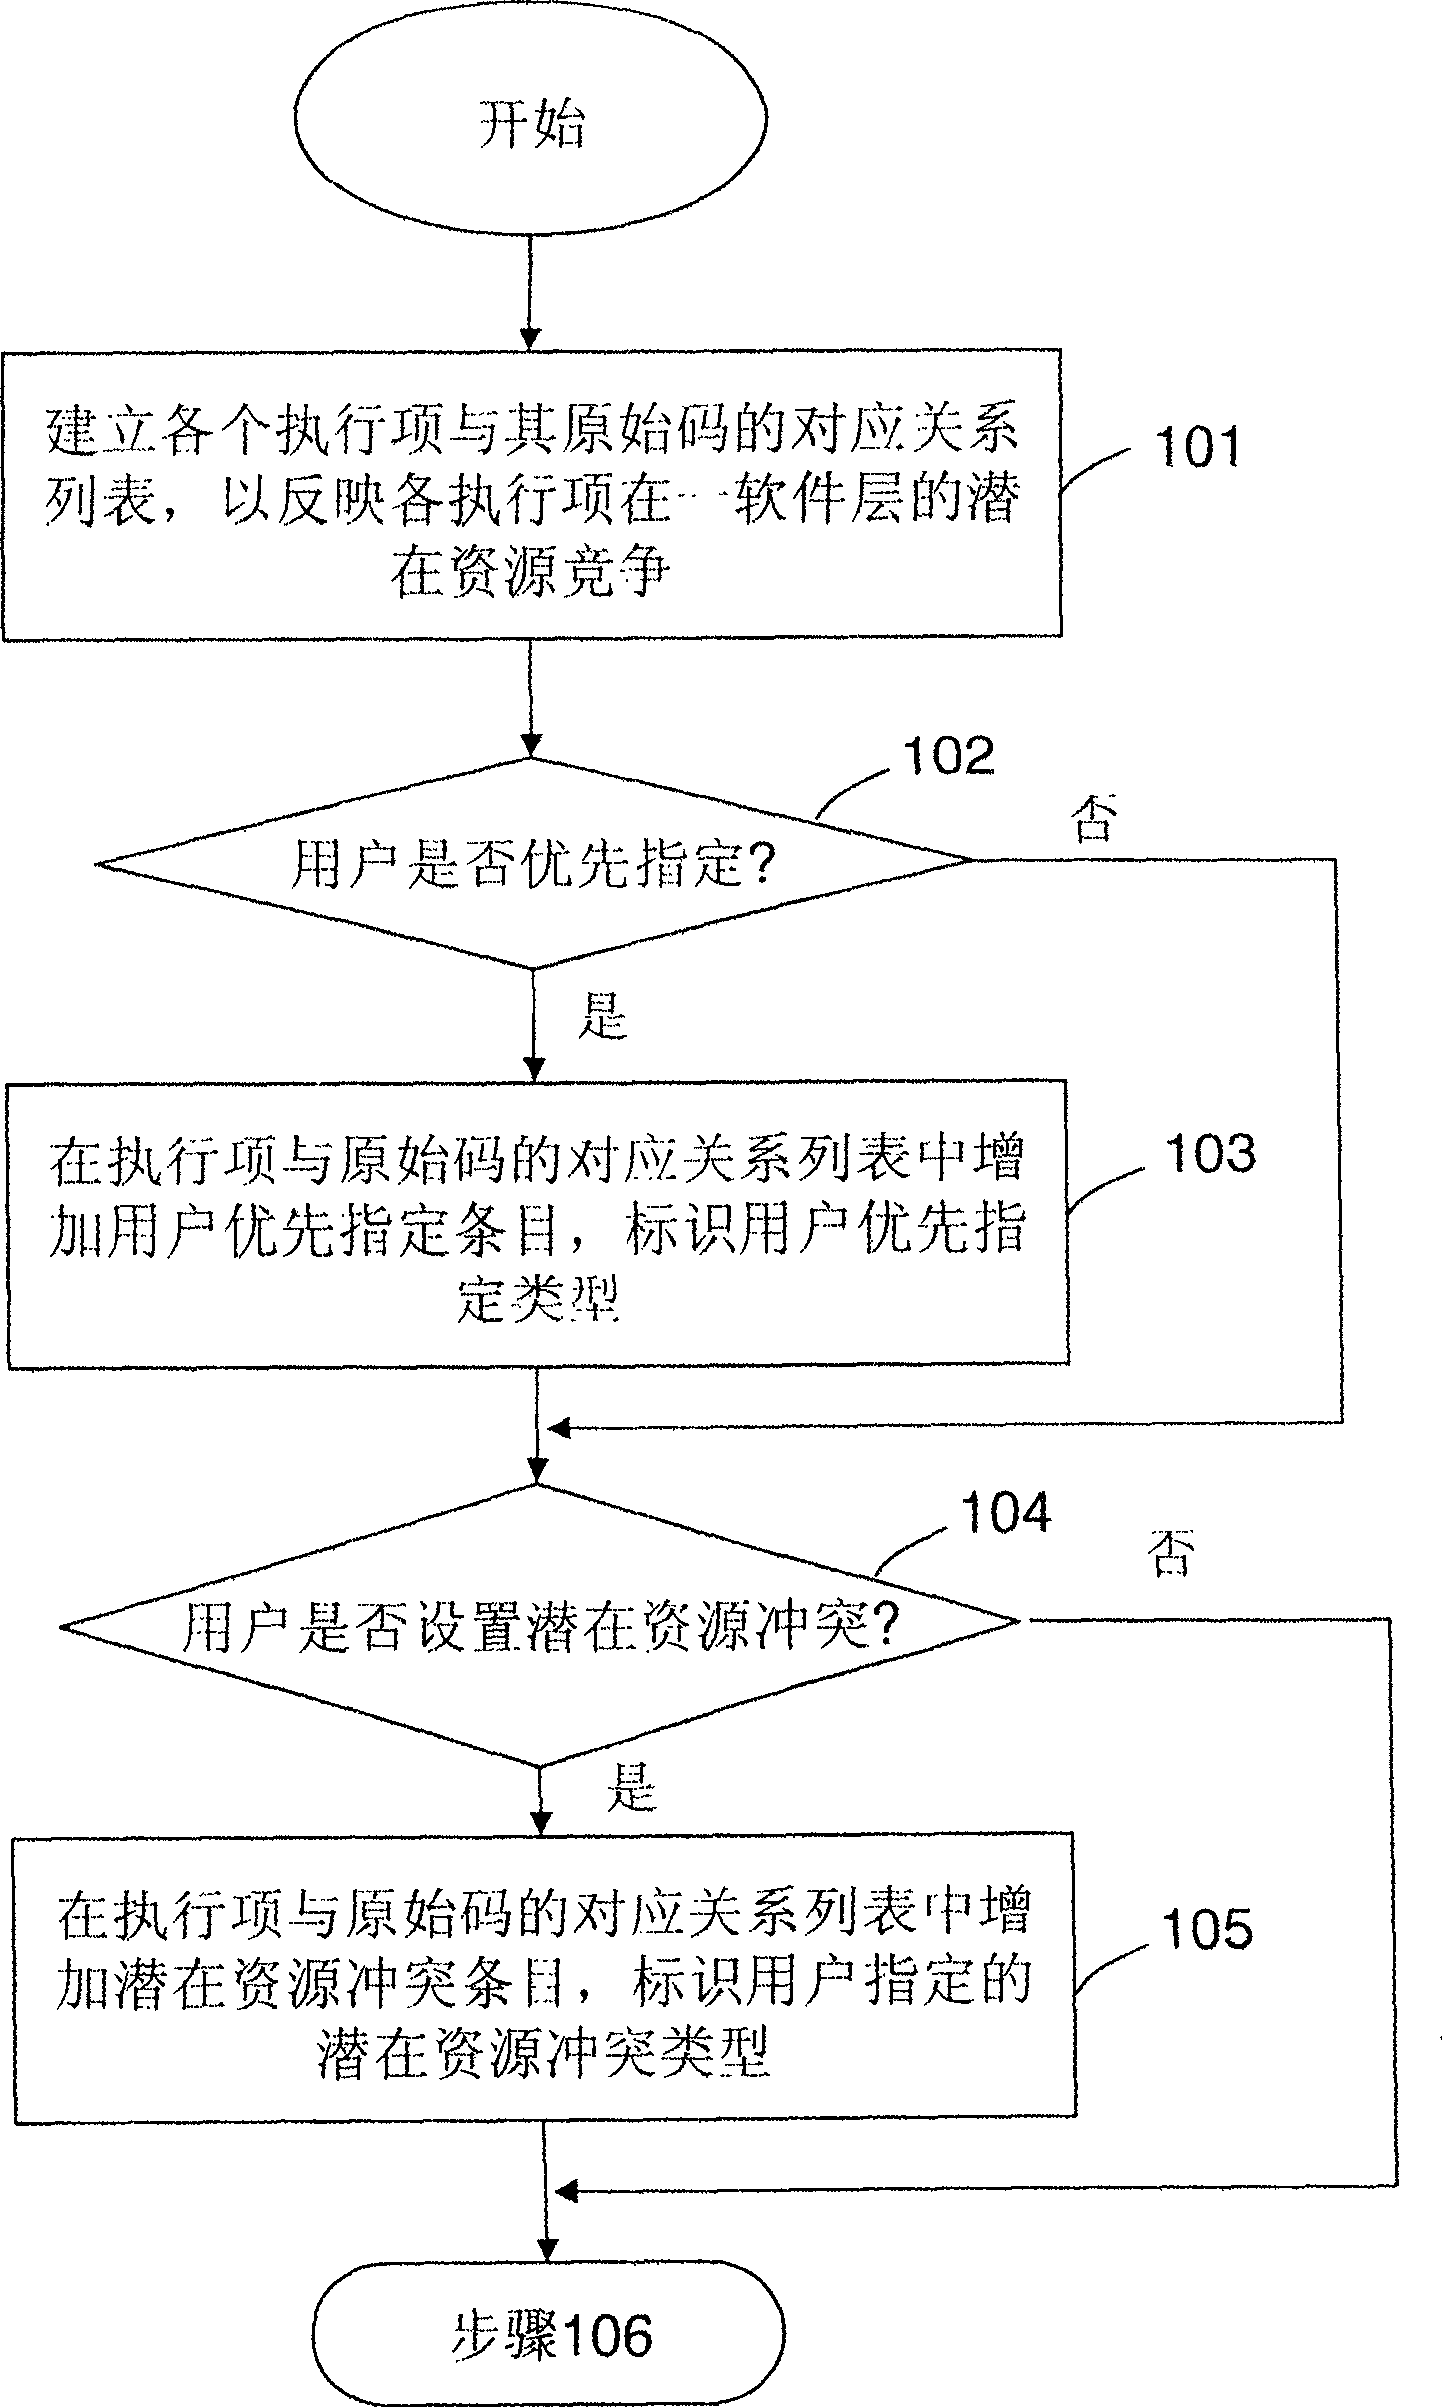 Performing thread distribution method for multi-nucleus multi-central processing unit